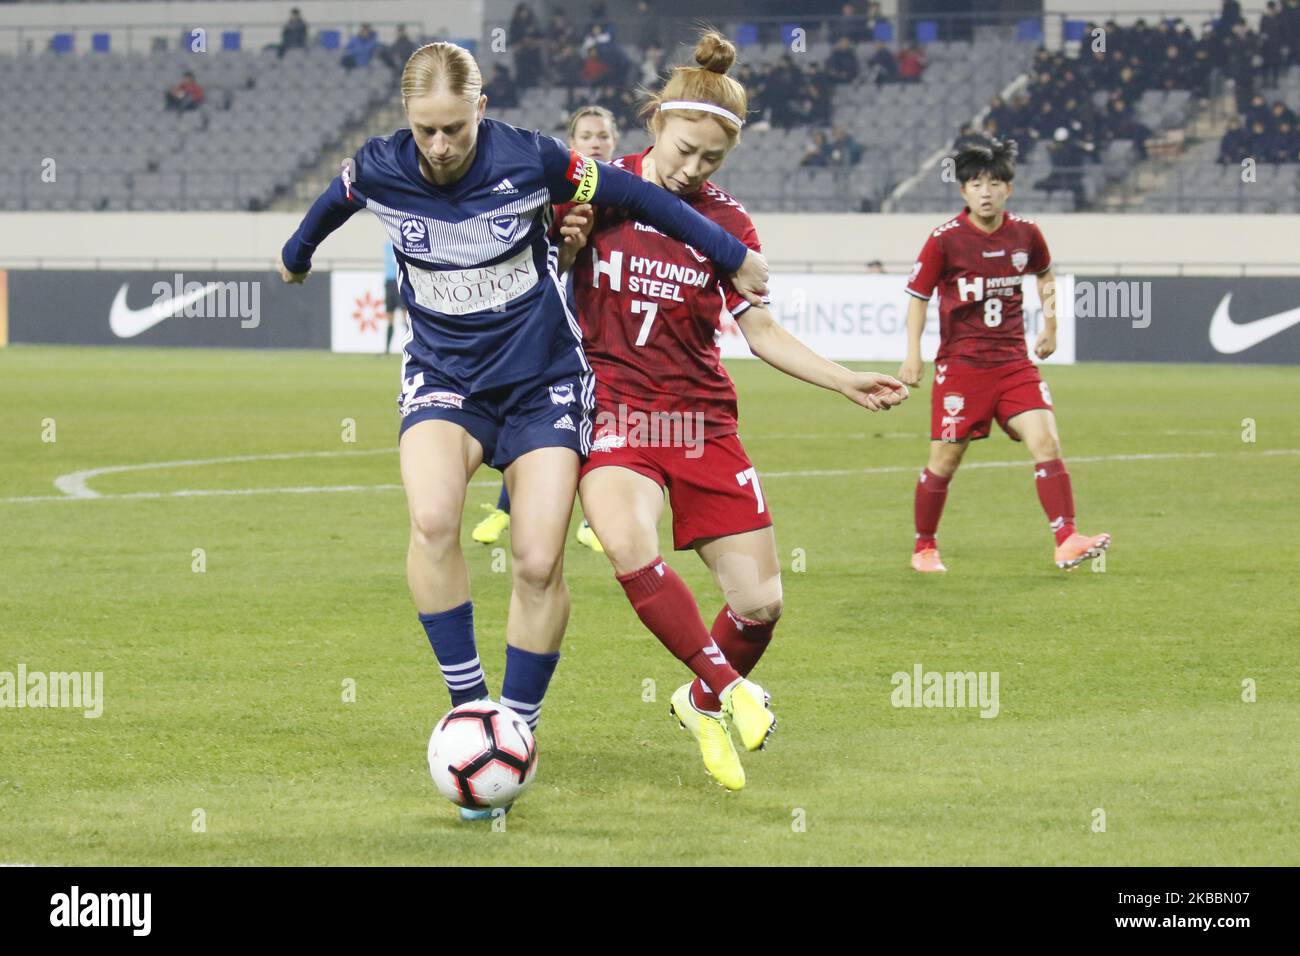 Natasha Dowie of Melbourne Victory and Lee Young Ju of Incheon Hyundai Steel Red Angels action during during an Women's Club Championship 2019-FIFA/AFC Pilot Tournamant Melbourne Victory V Incheon Hyundai Steel Red Angels at Yongin Citizens Sports Park in Yongin, South Korea, on November 26, 2019. Match Won Incheon Hyundai Steel Red Angels, Score by 4-0. (Photo by Seung-il Ryu/NurPhoto) Stock Photo